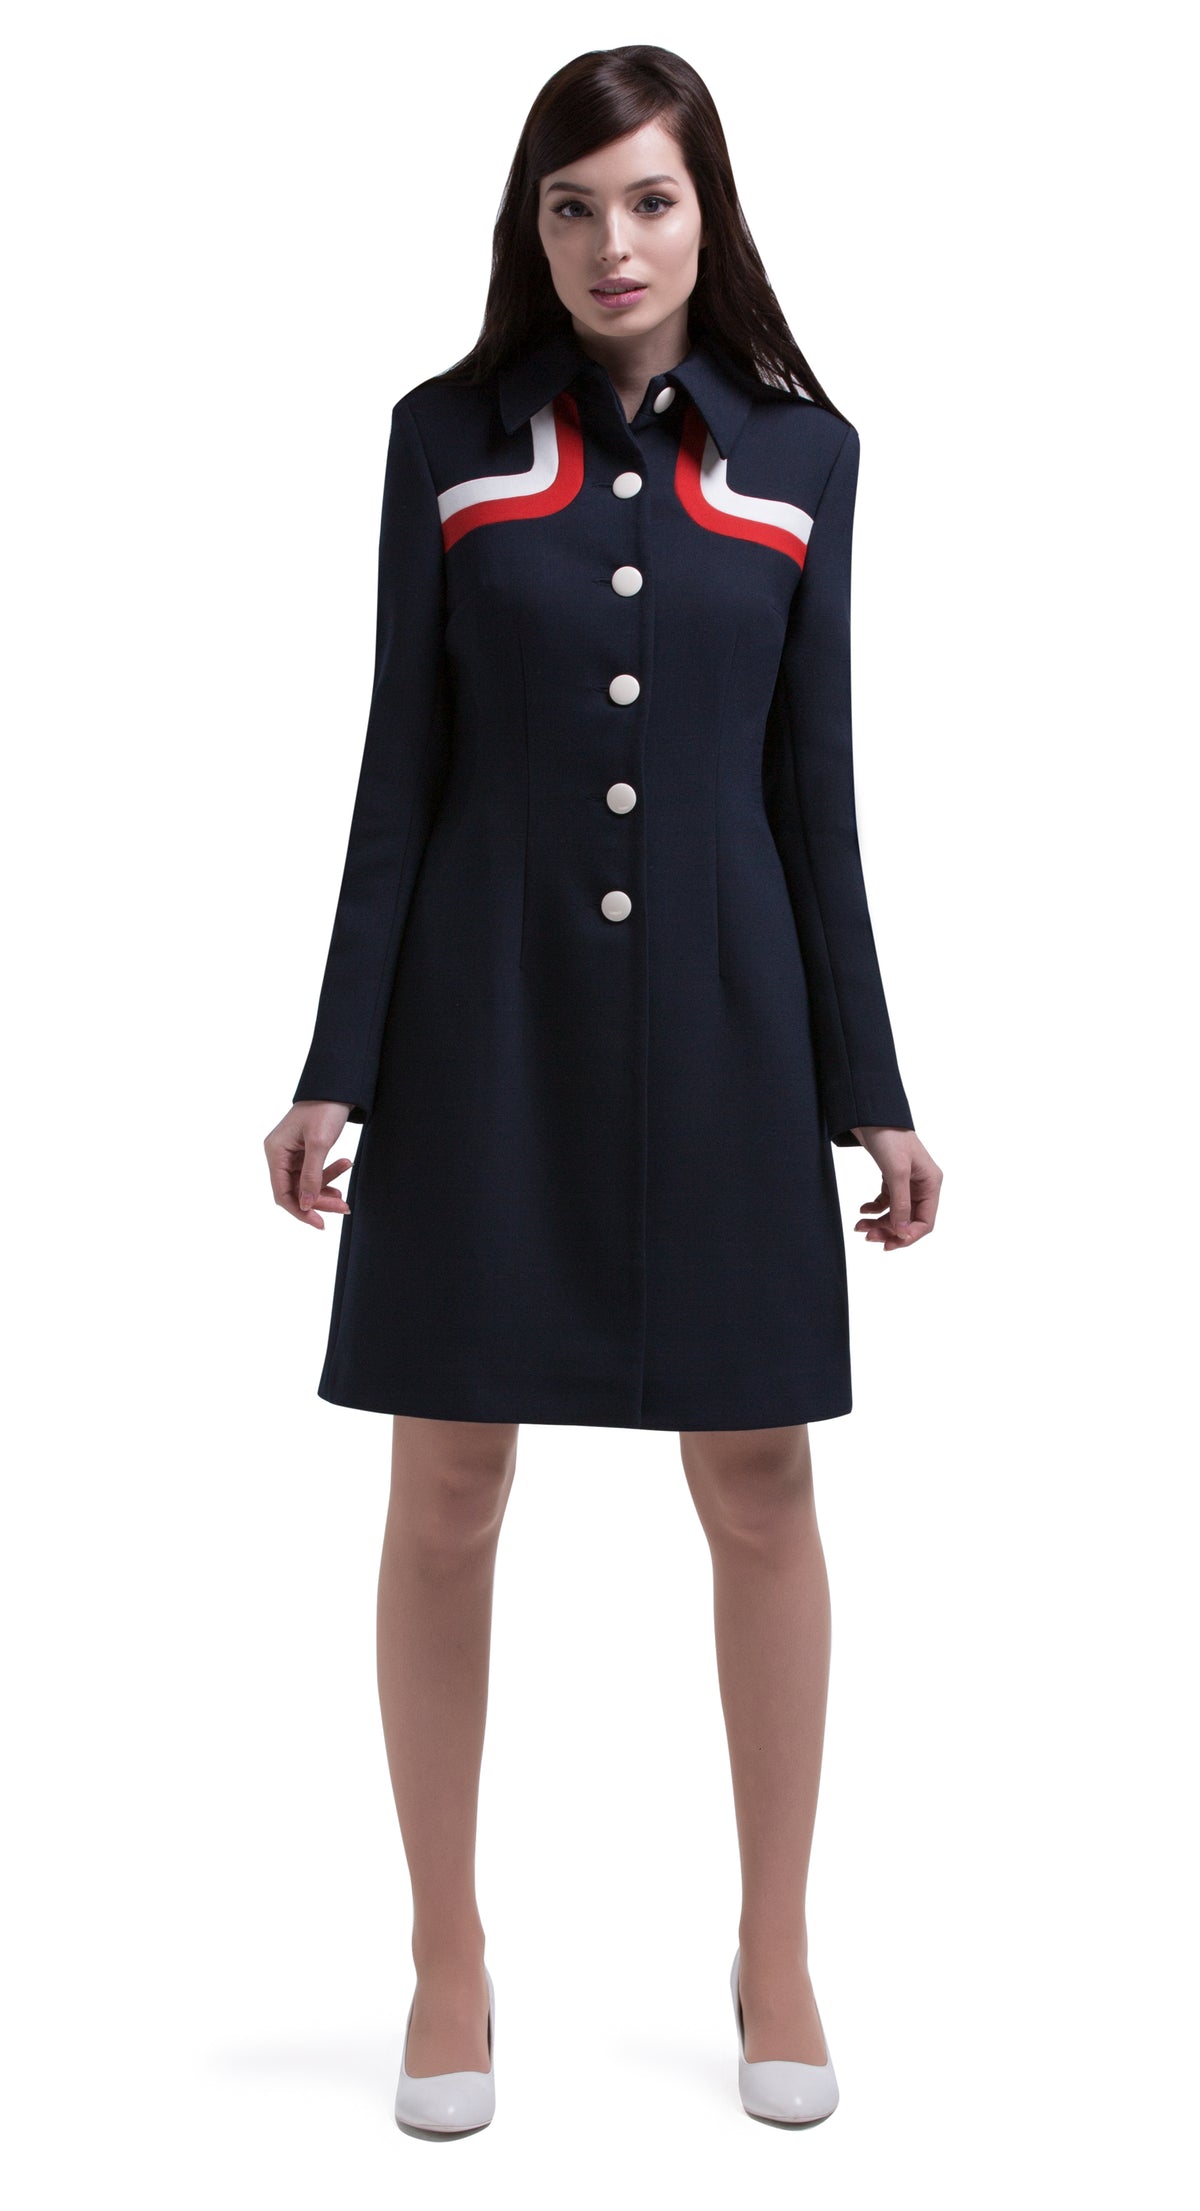 Another immediately sixties mod Autumn coat that allows for the timeless tri-colour of navy blue, red and light cream to produce a dramatic silhouette. A straight cut featuring a classic collar, fully lined Italian mill fabric, with functioning side pockets, animated white button front closure and a cool retro striped neckline.  An entrance maker over plain dresses within the tricolour colour range or paired perfectly with matching dress to complete this high fashion very wearable set.